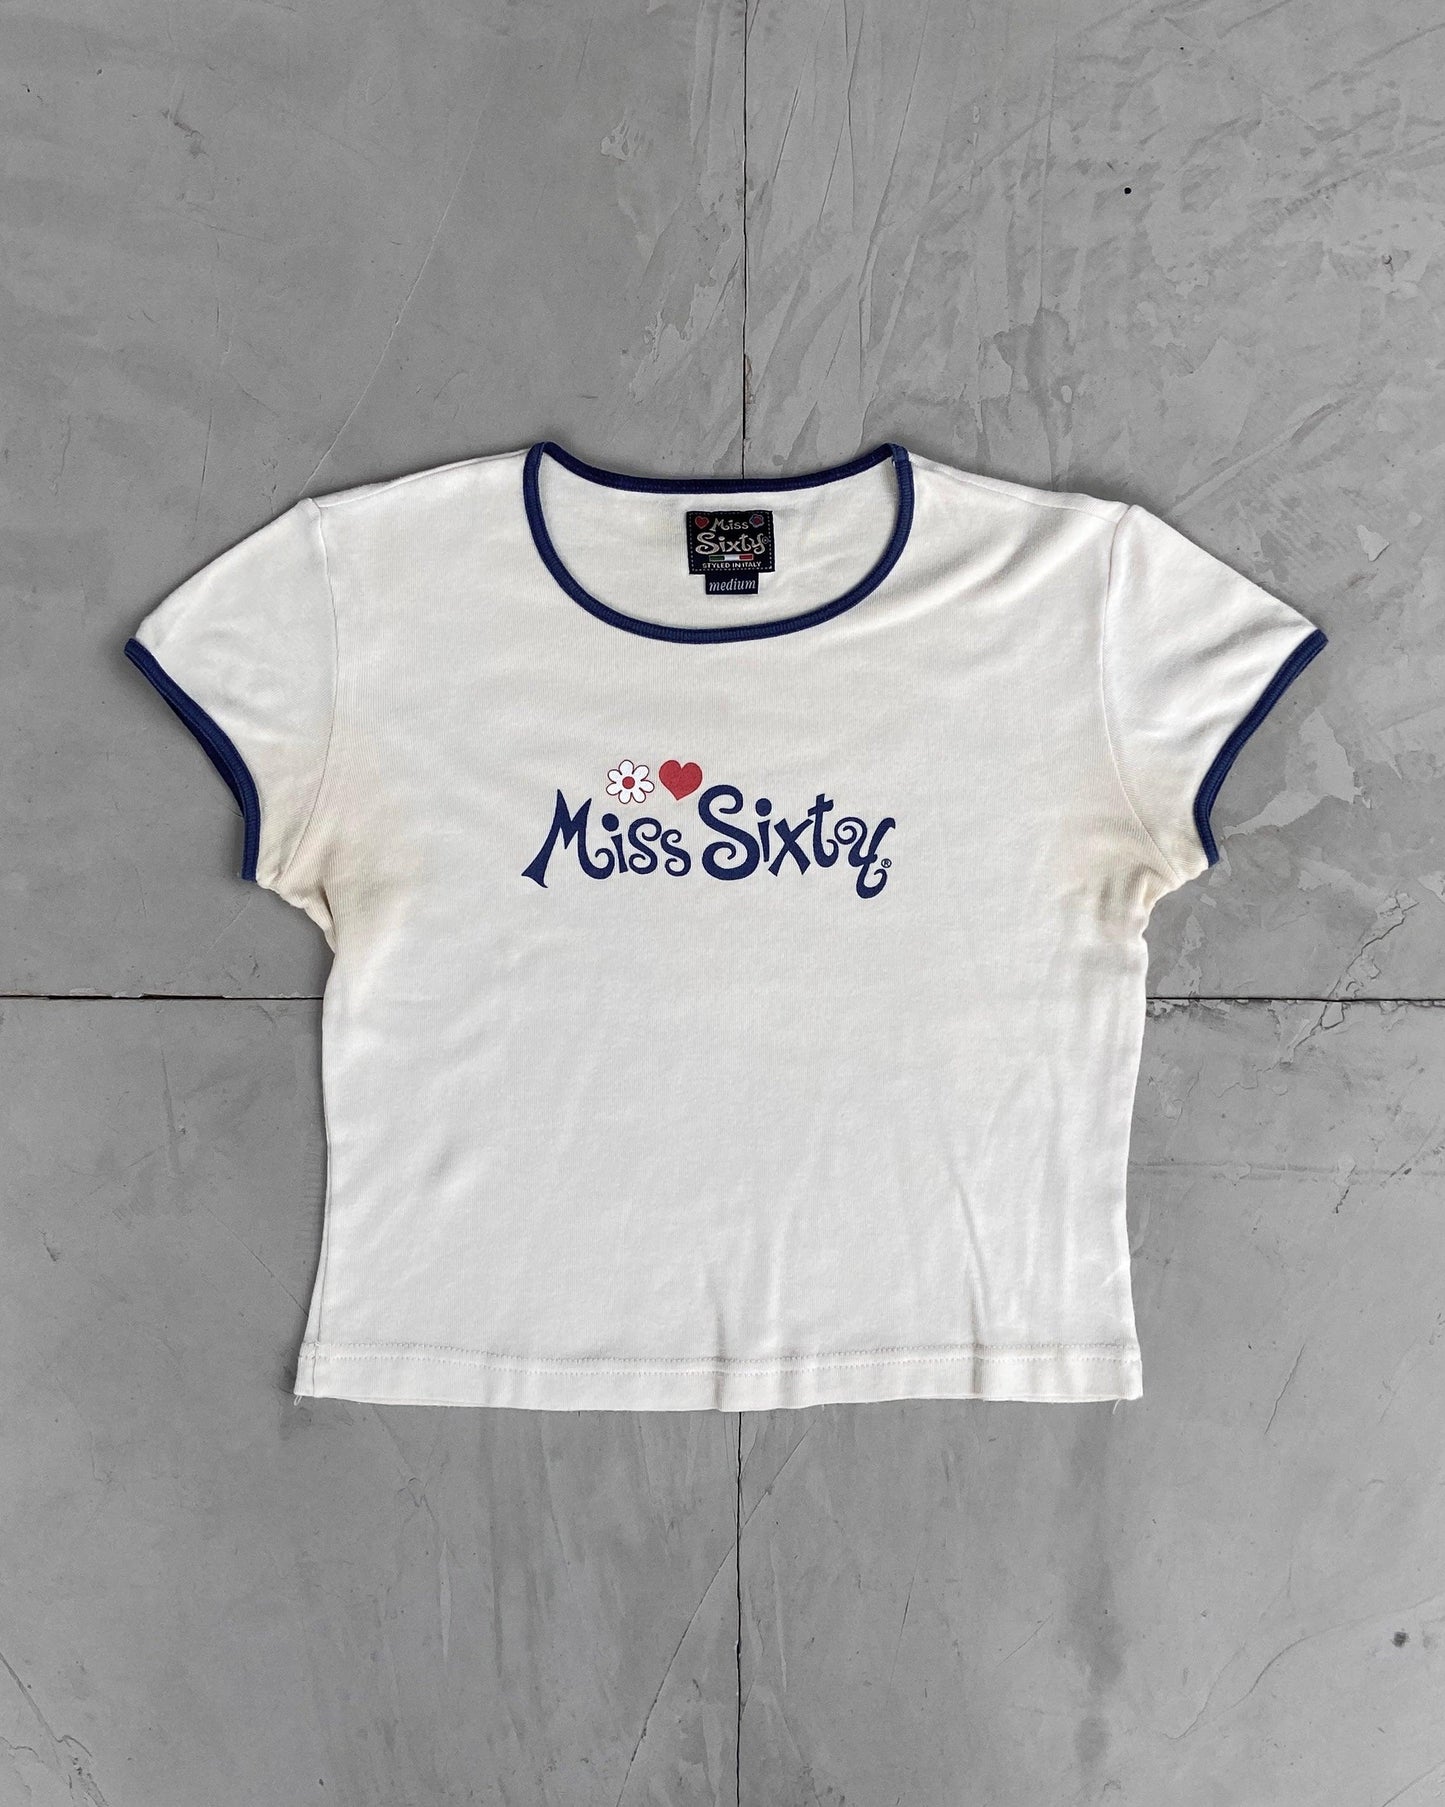 MISS SIXTY FLOWER LOGO TOP - M - Known Source